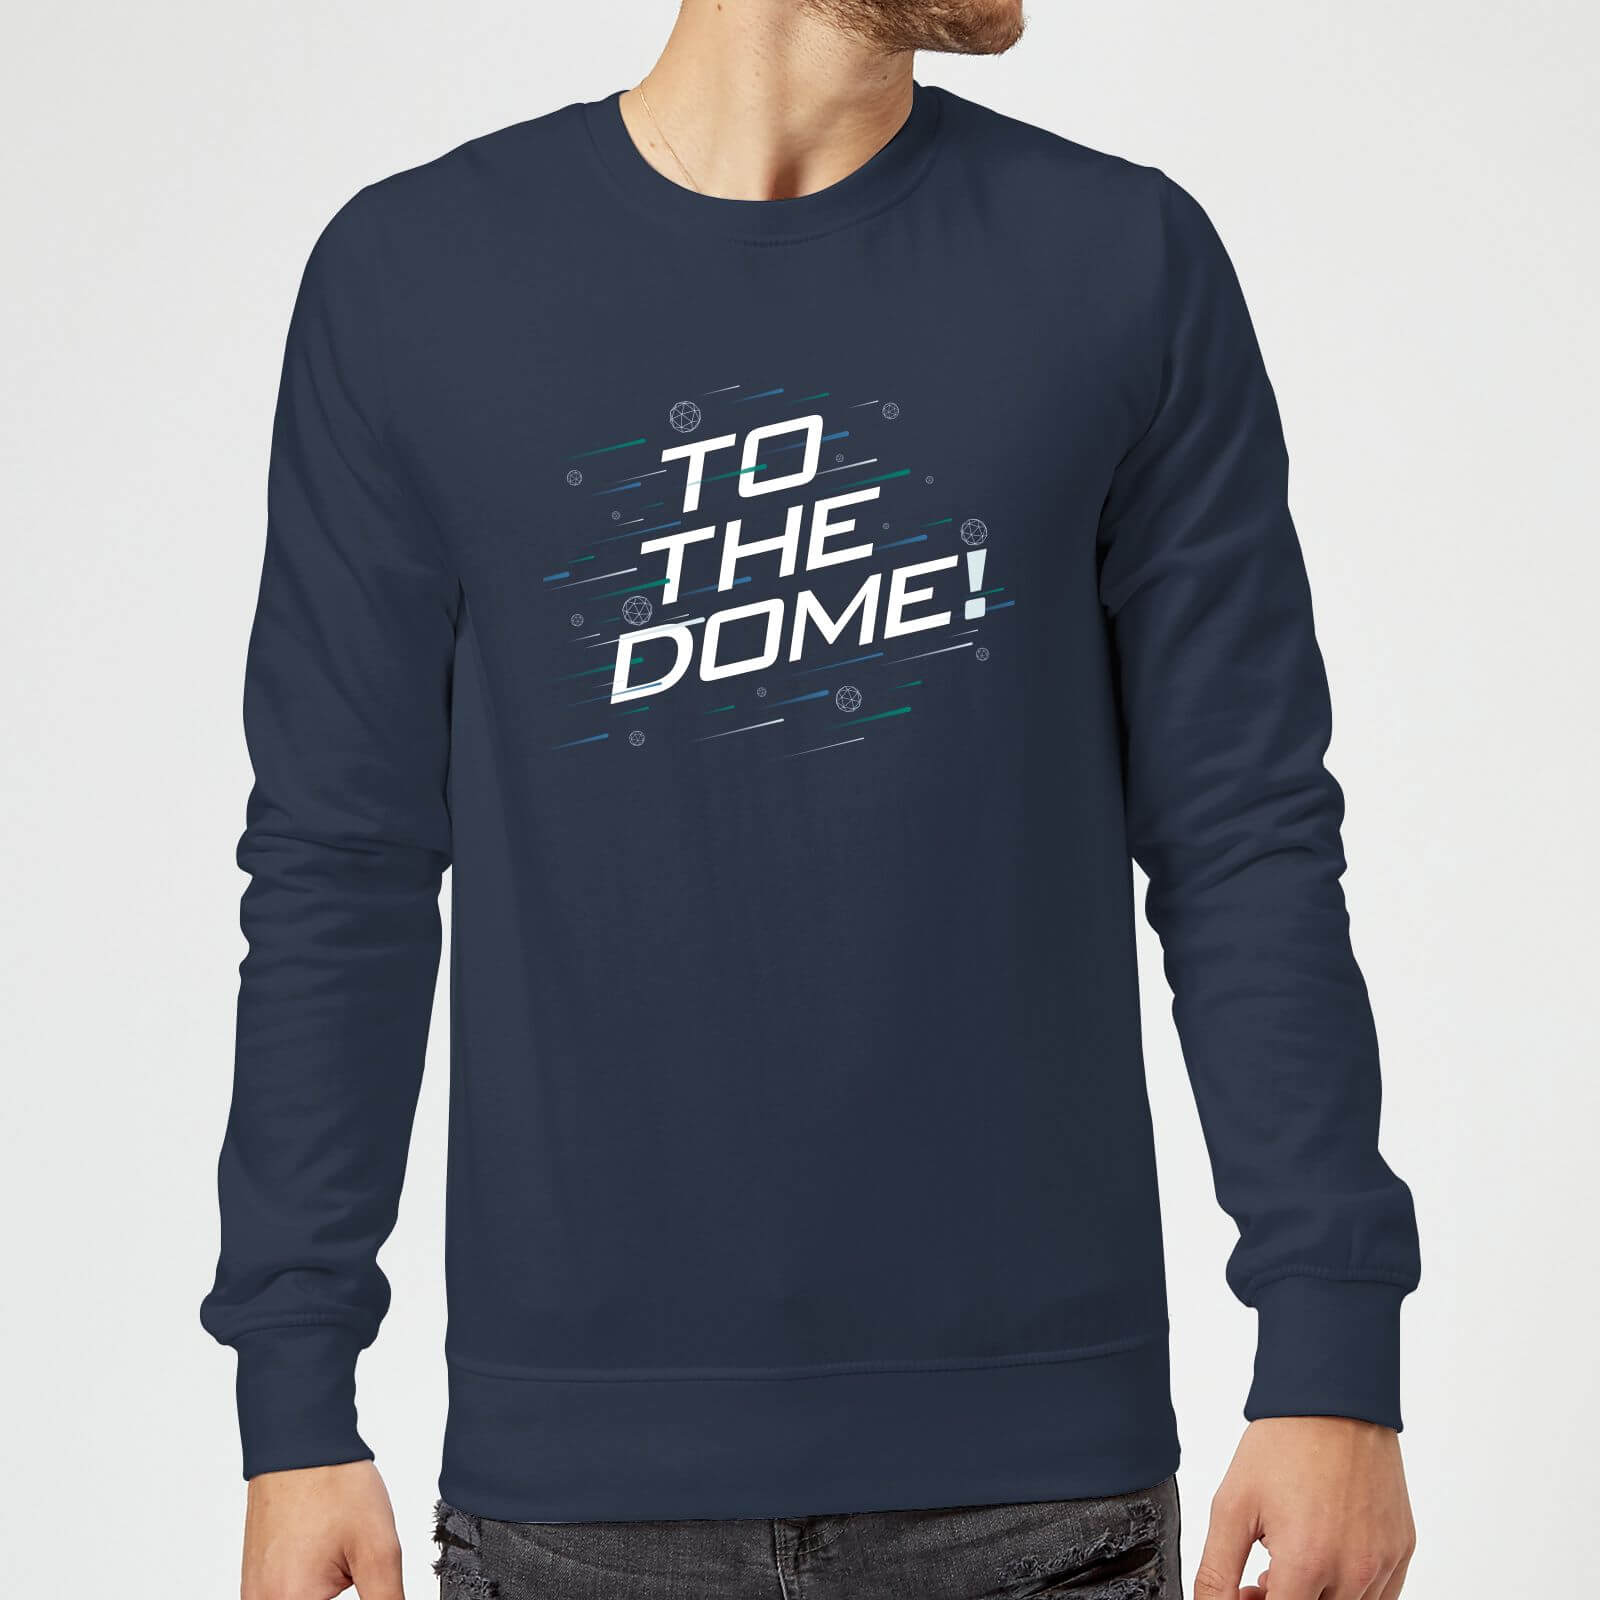 Crystal Maze To The Dome! Sweatshirt - Navy - S - Navy